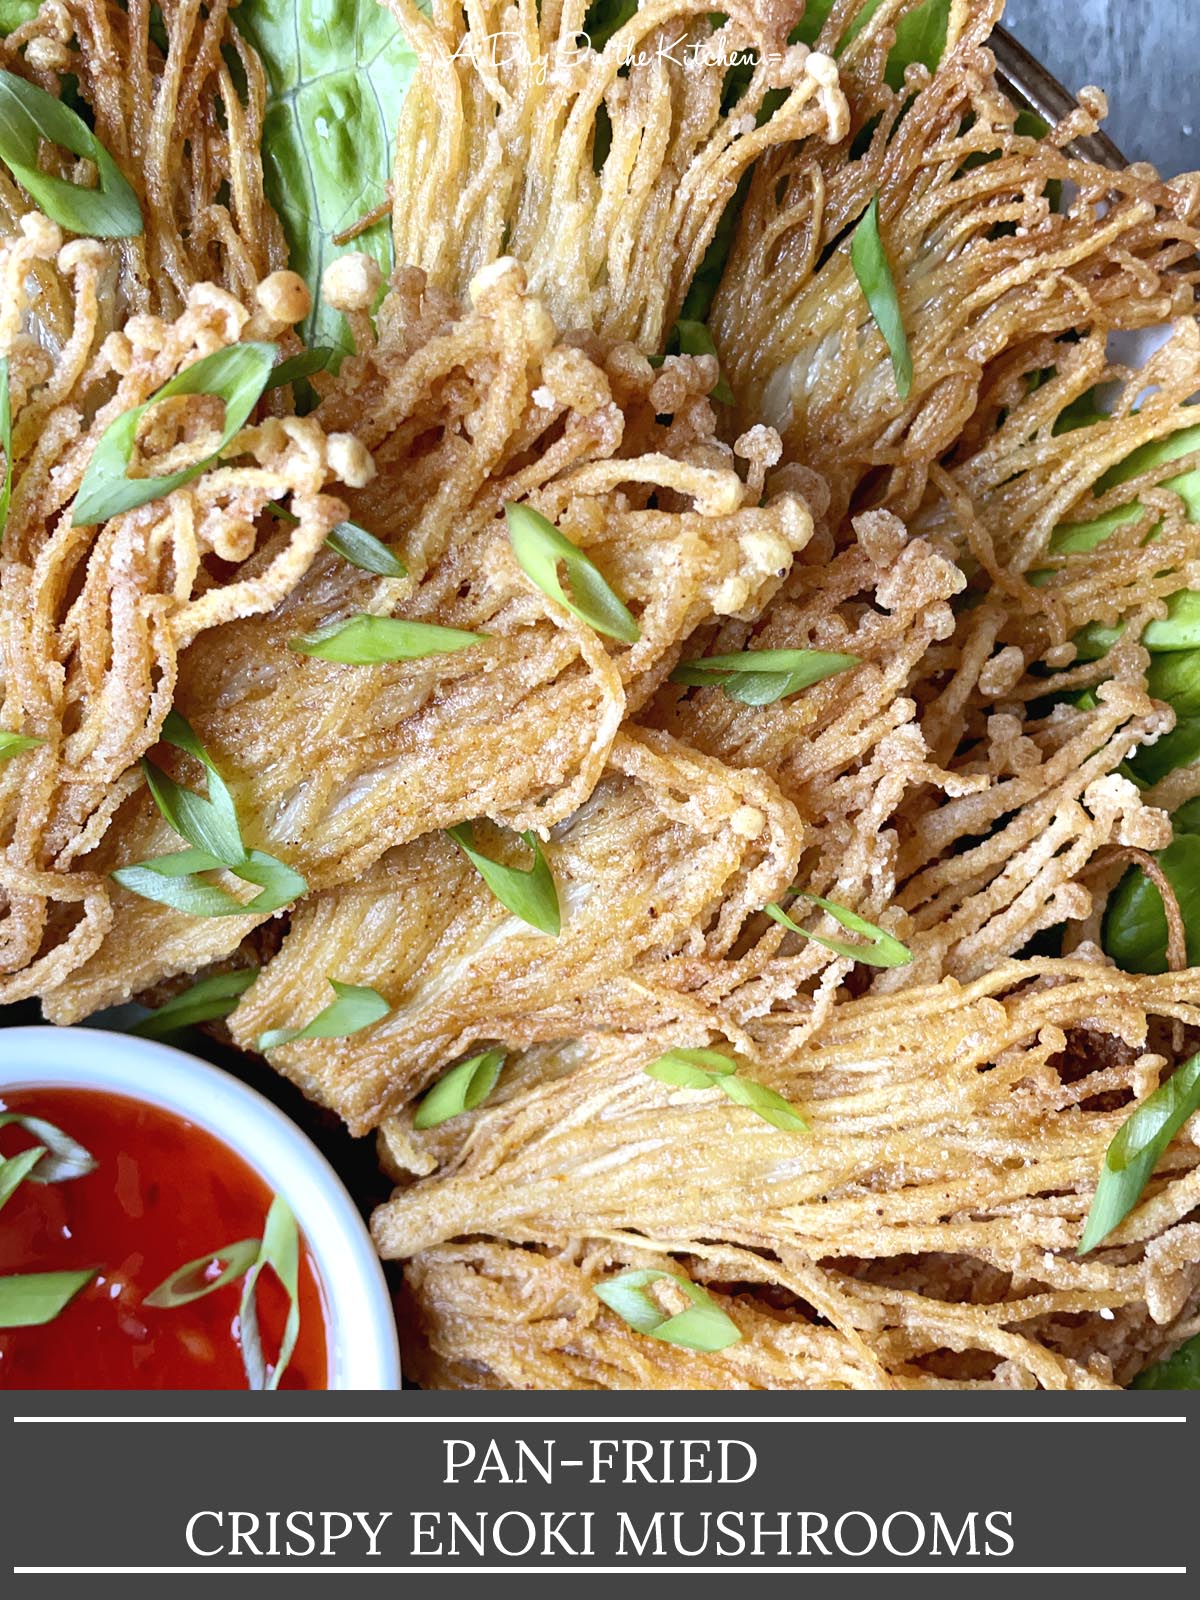 Pan-fried Crispy Enoki Mushrooms topped with chopped green onions, next a white dish or chili sauce.